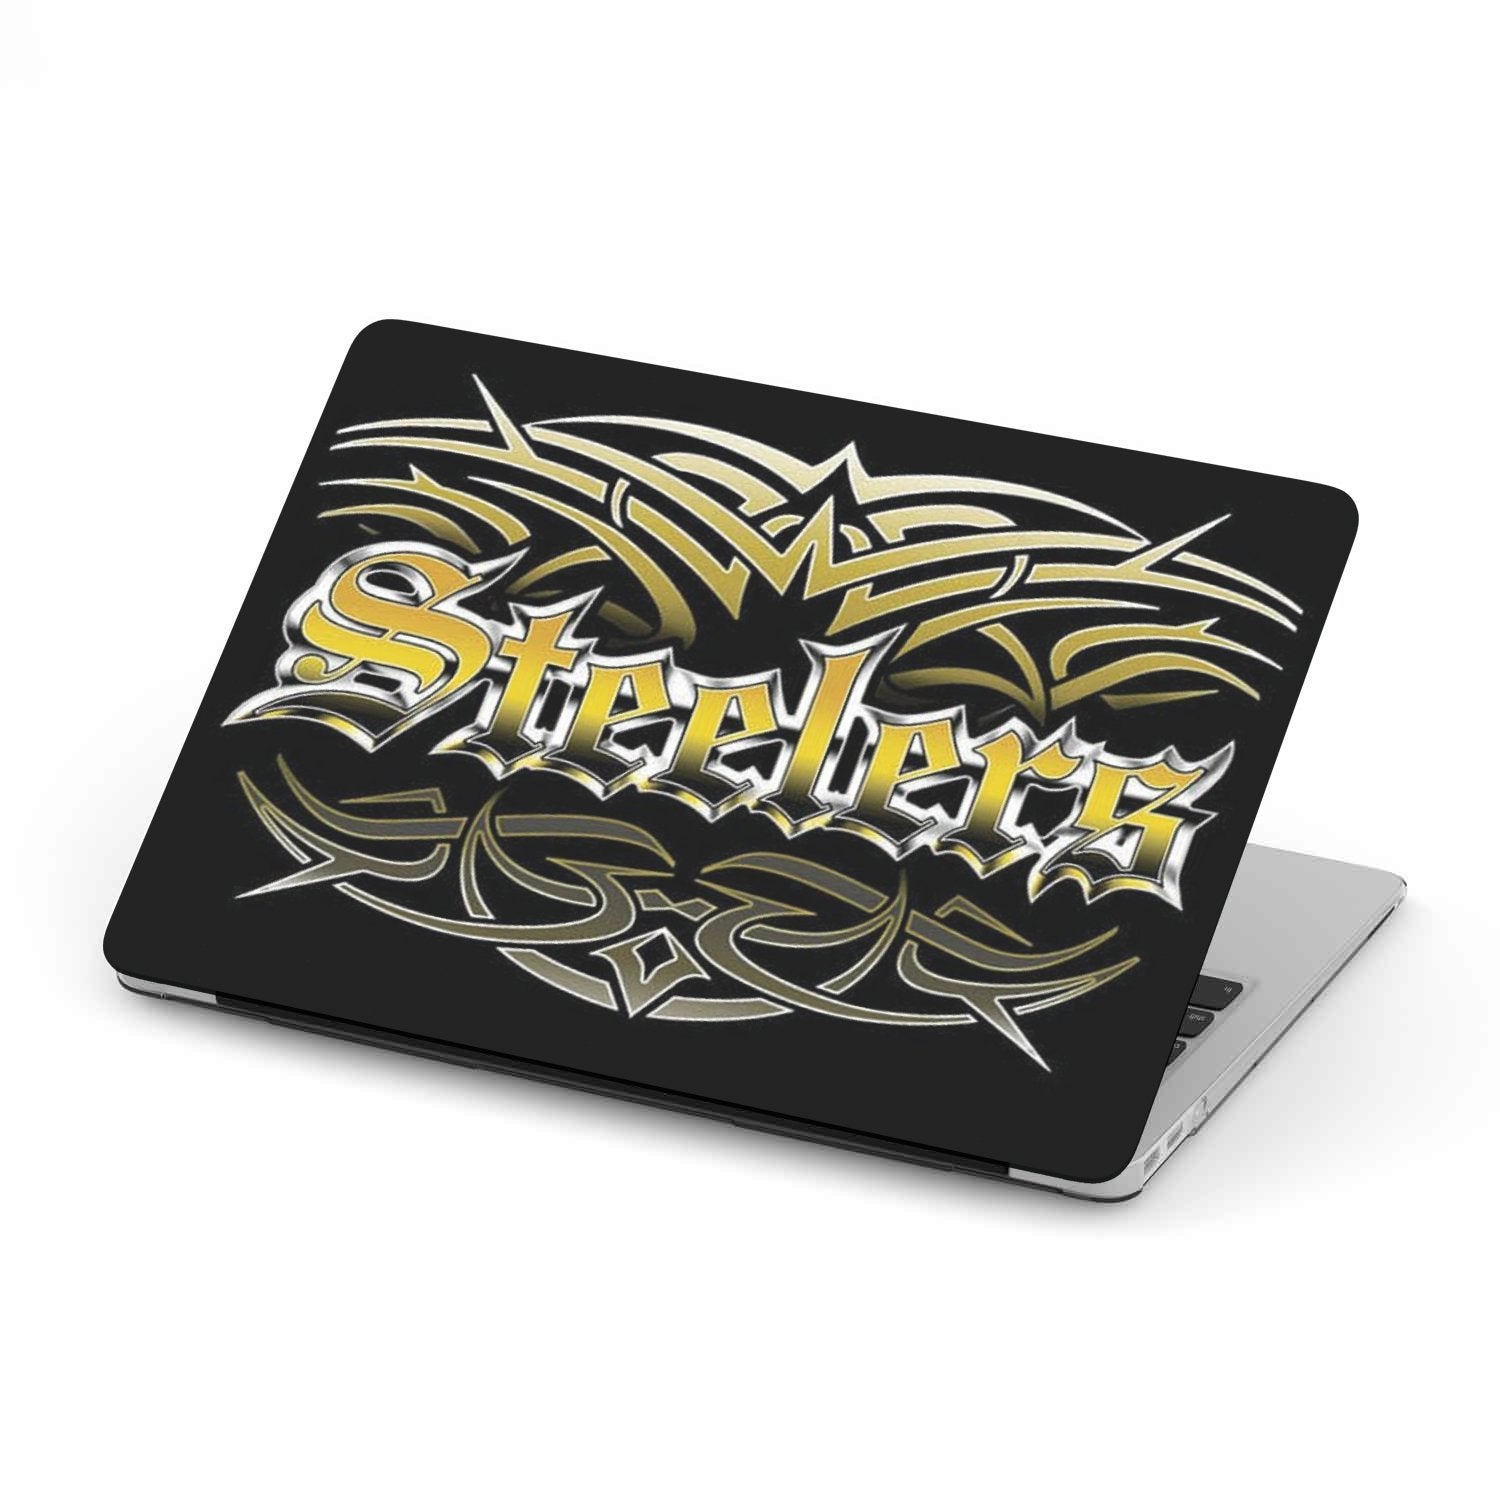 Steelers Team Custom MacBook Case by Woody Signs Co. - Handmade Crafted Unique Wooden Creative